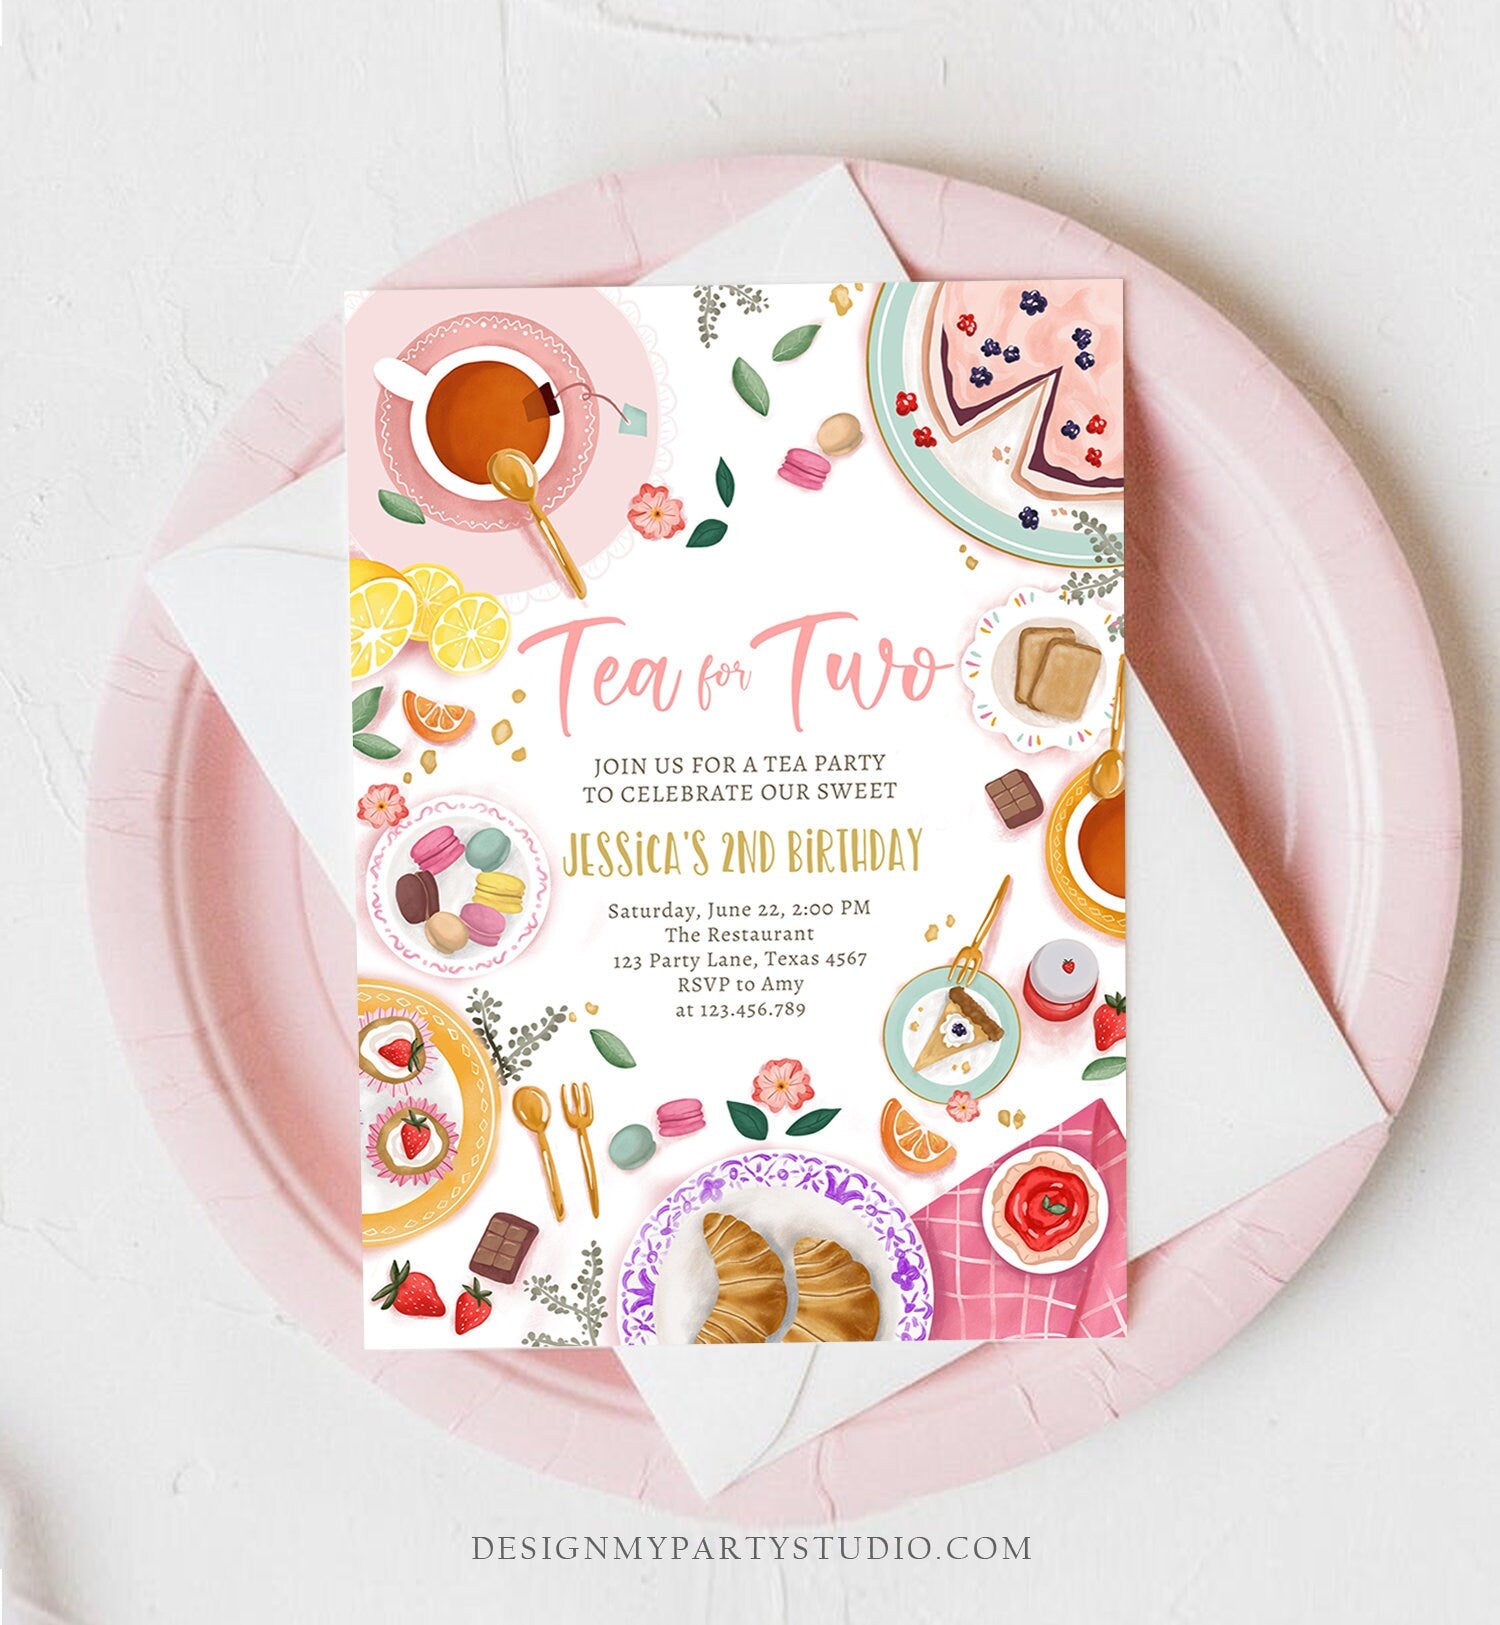 Editable Tea for Two Birthday Invitation Girl Tea Party Invite Pink Gold Floral Peach Pink Download Printable Template Corjl Digital 0478